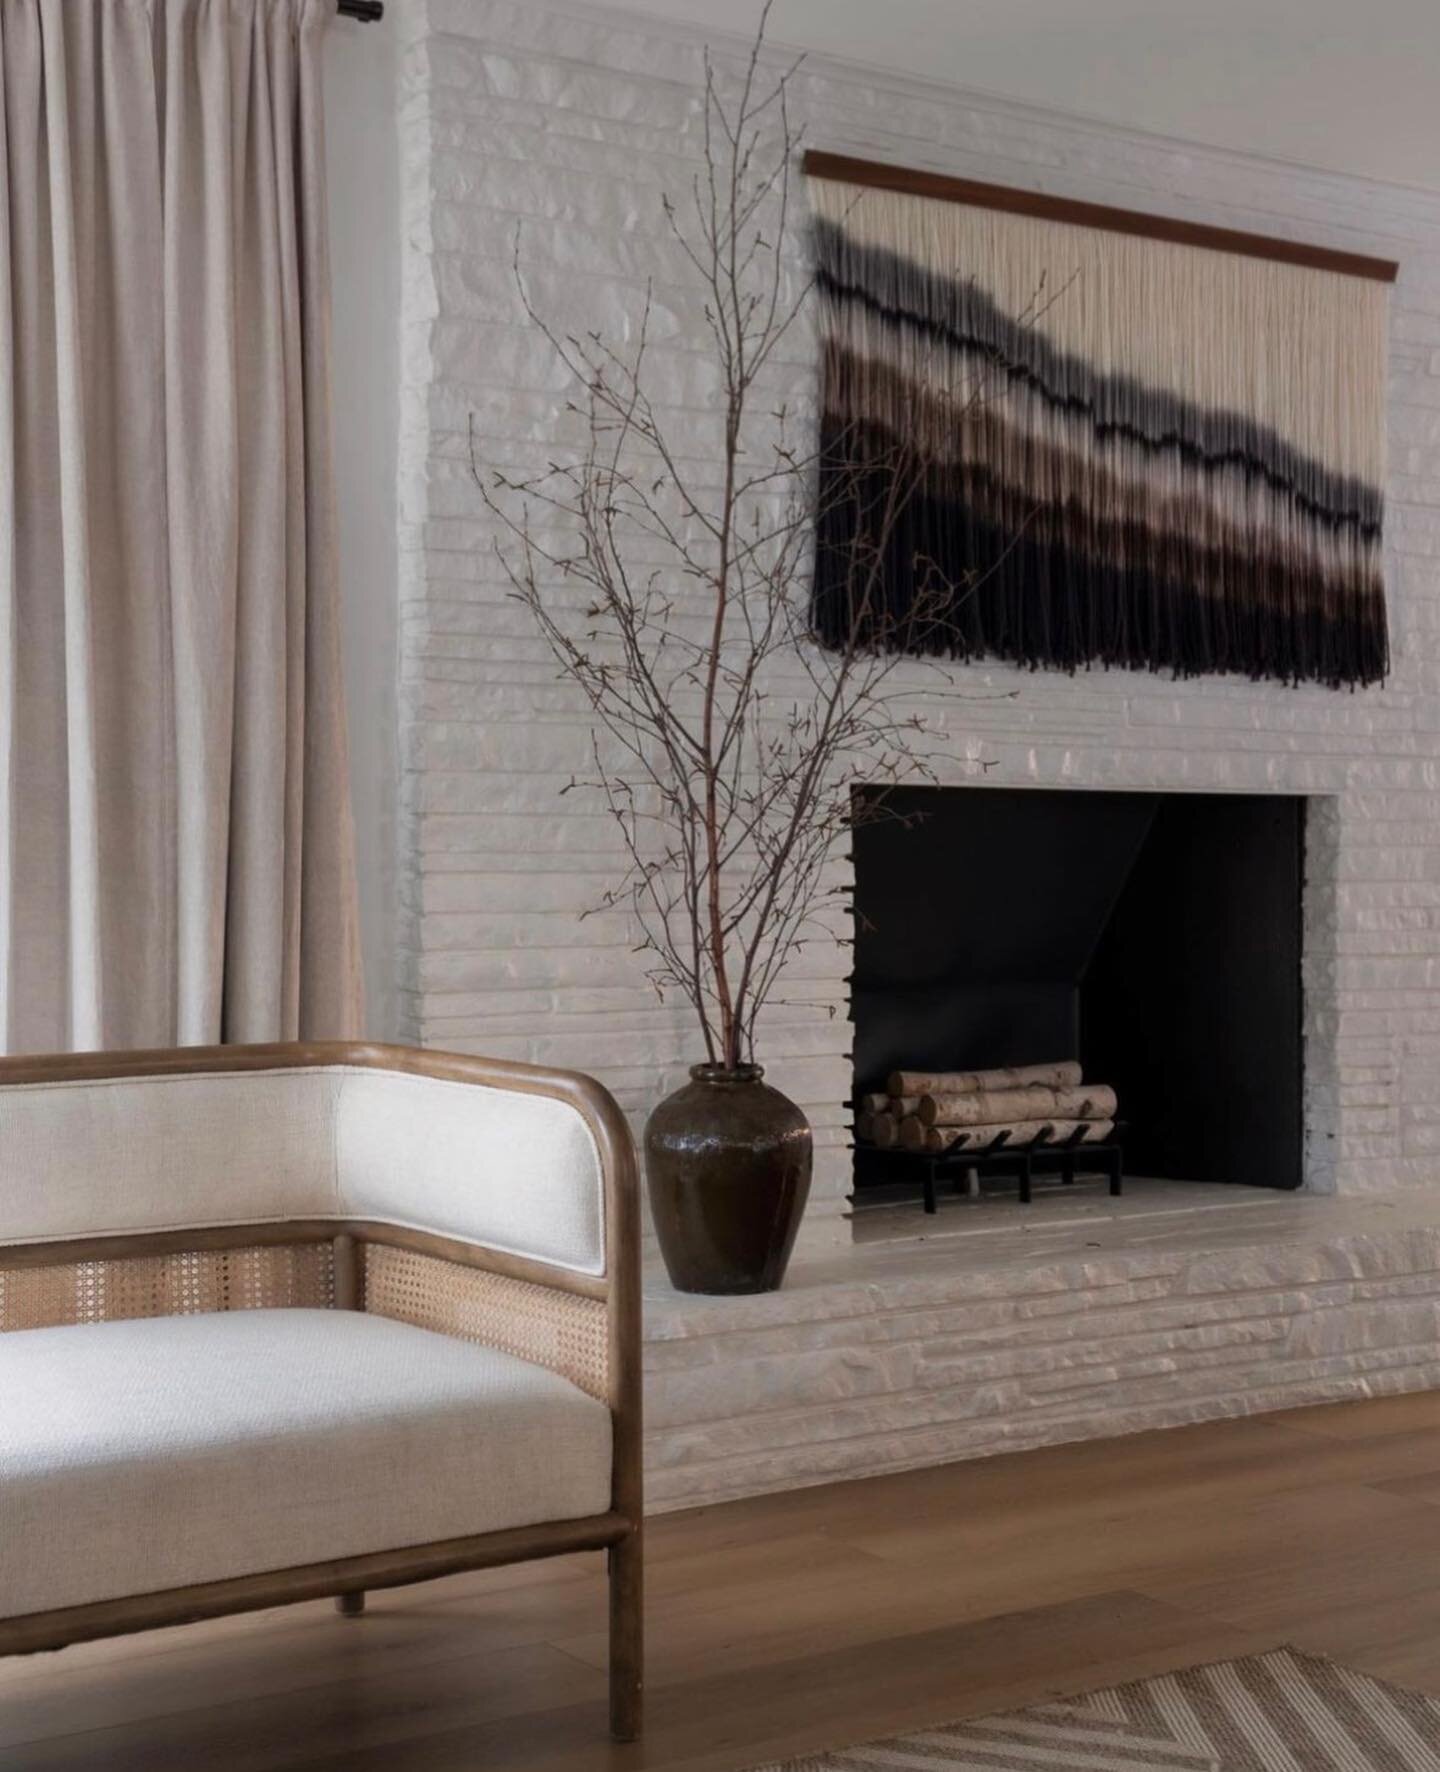 @casamettadesign really nailed it with this fireplace makeover. 🙌

See their profile for the before/after of the Bridal Suite at @theaddisongrove